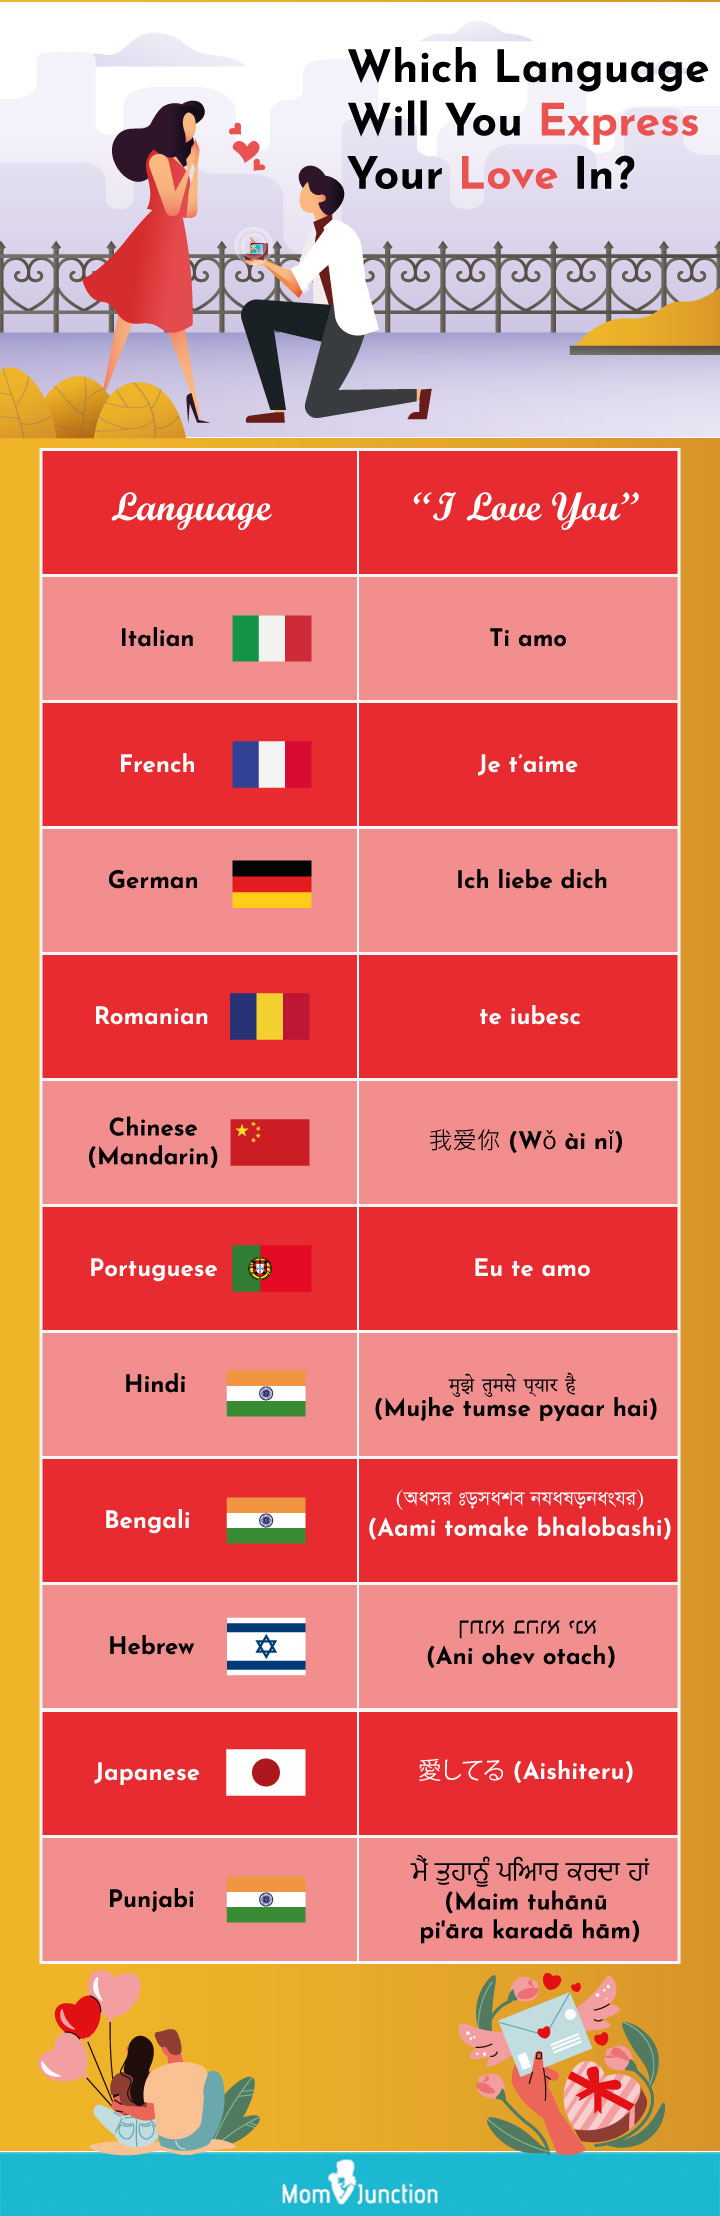 which language will you express your love in (infographic)